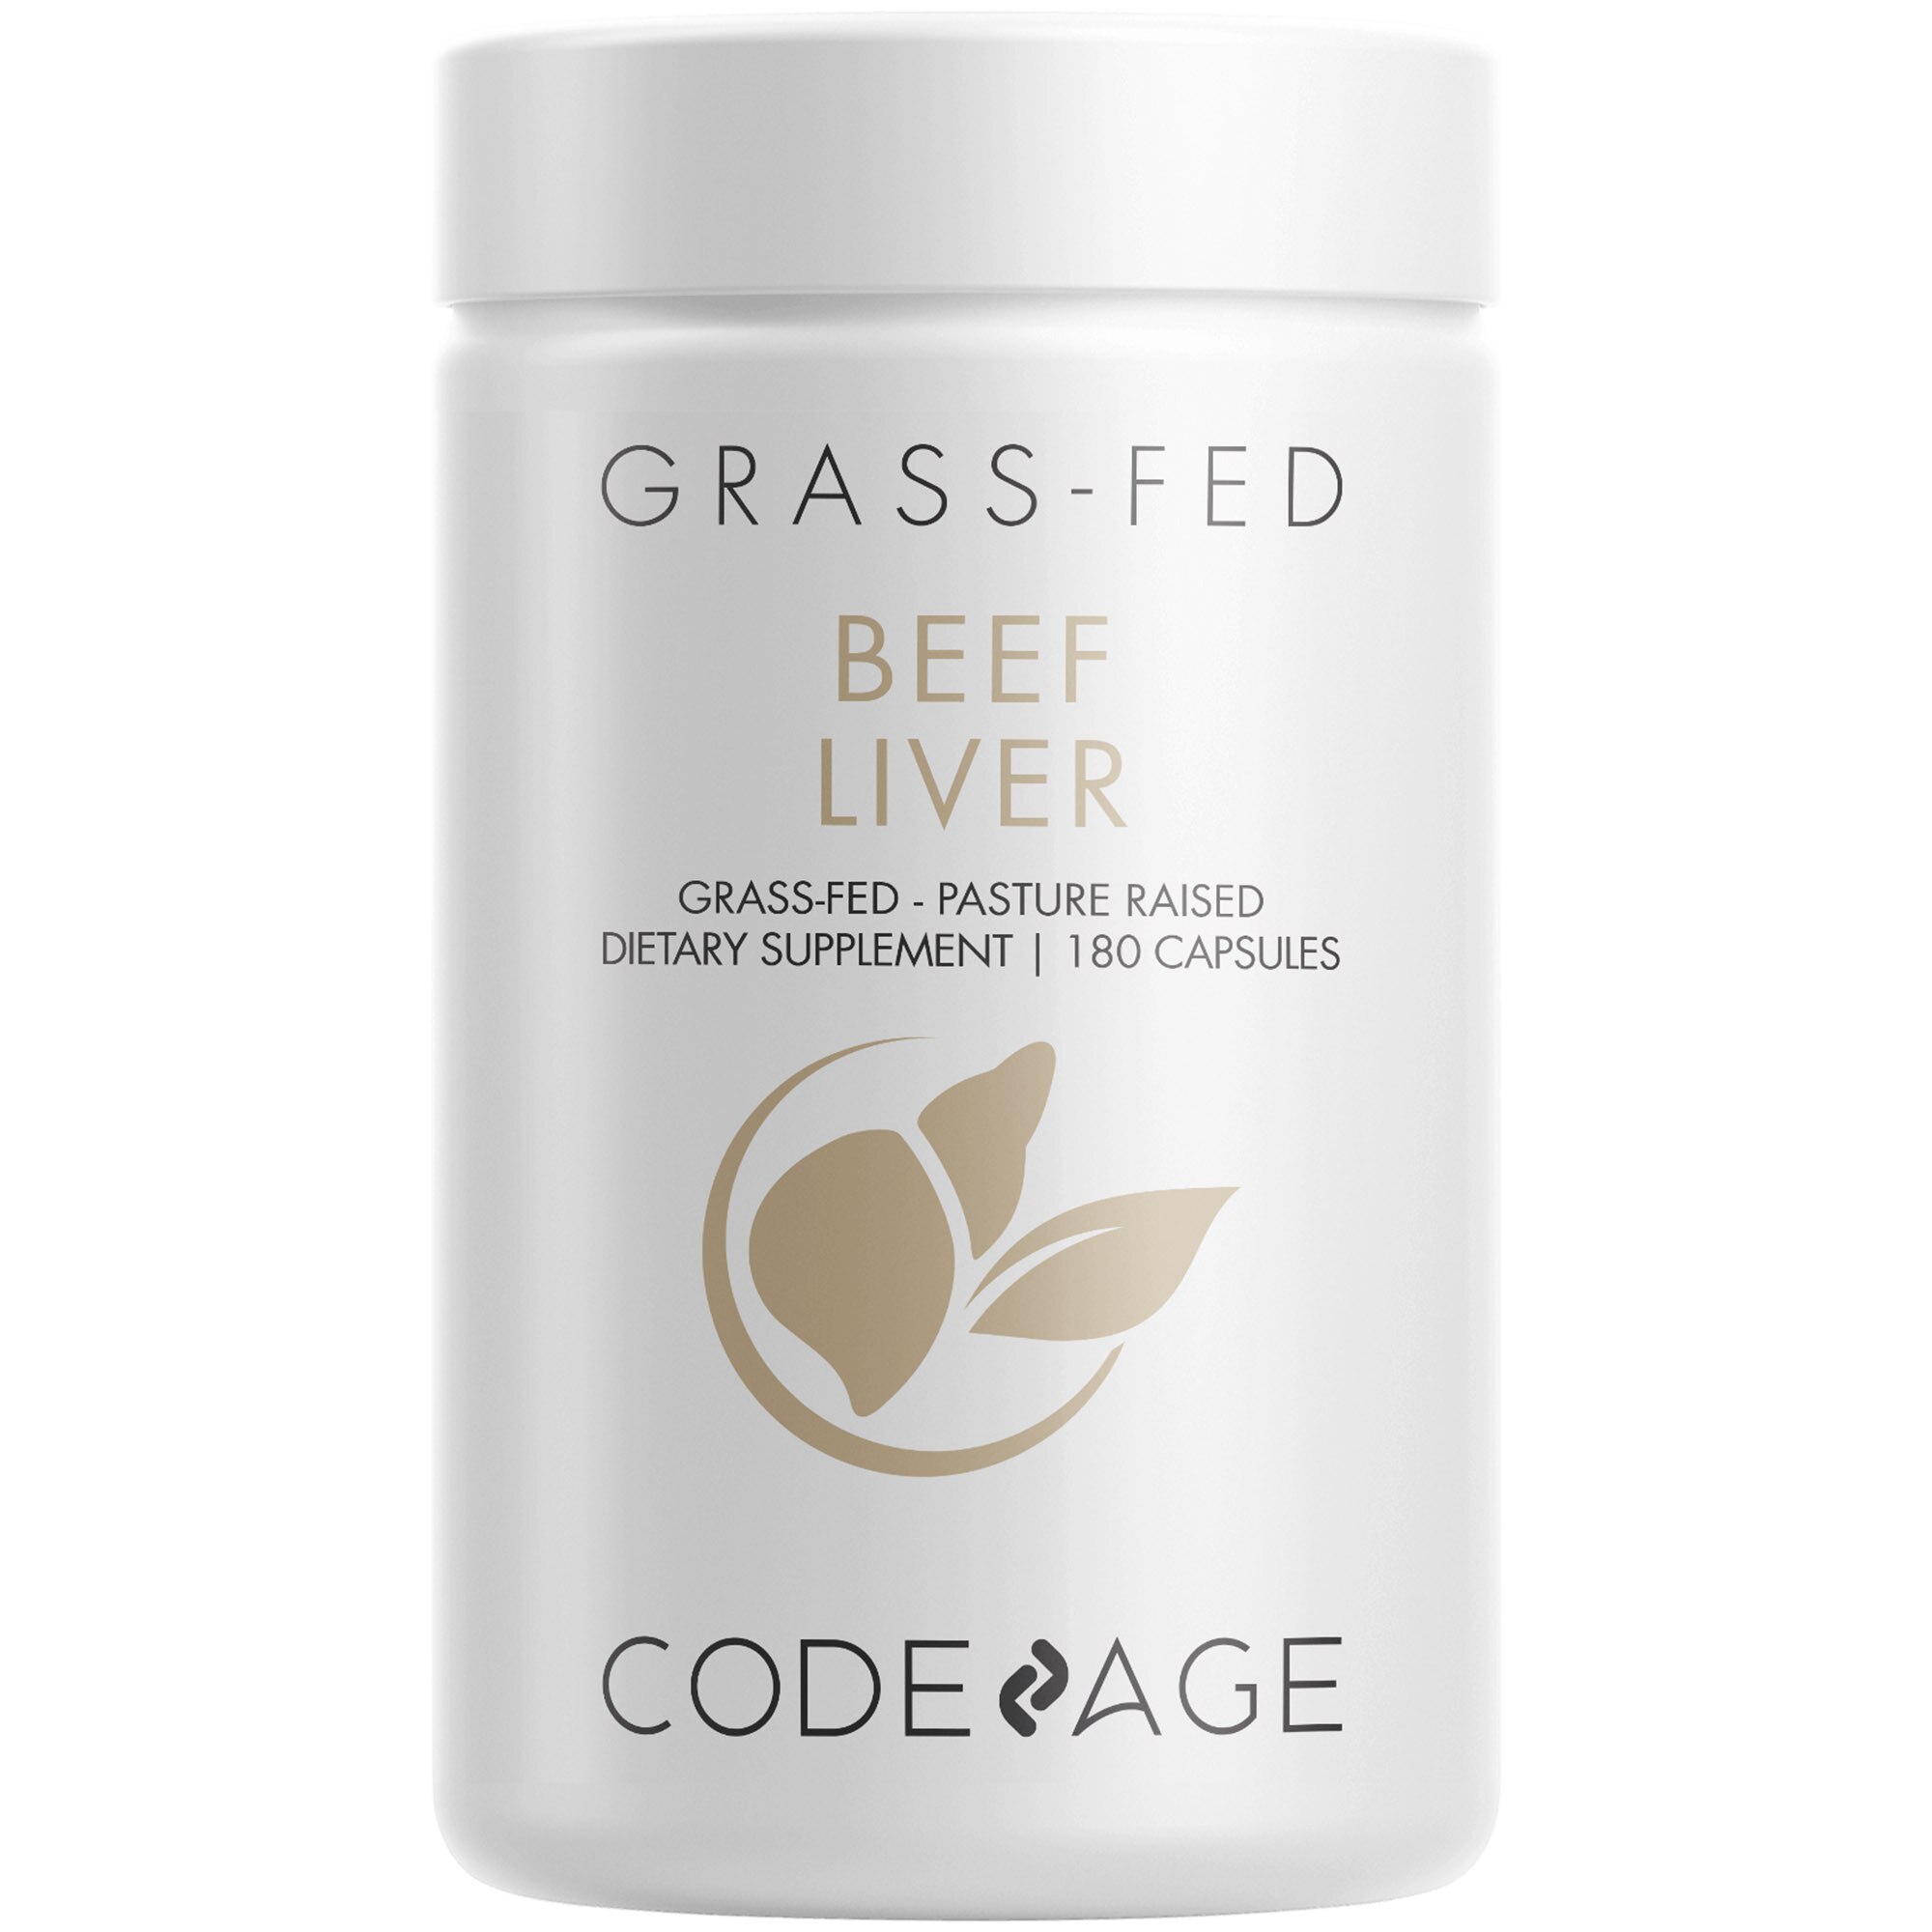 Grass-Fed Beef Liver, Grass-Finished, Pasture-Raised, Freeze-Dried Glandular Supplement, 180CT